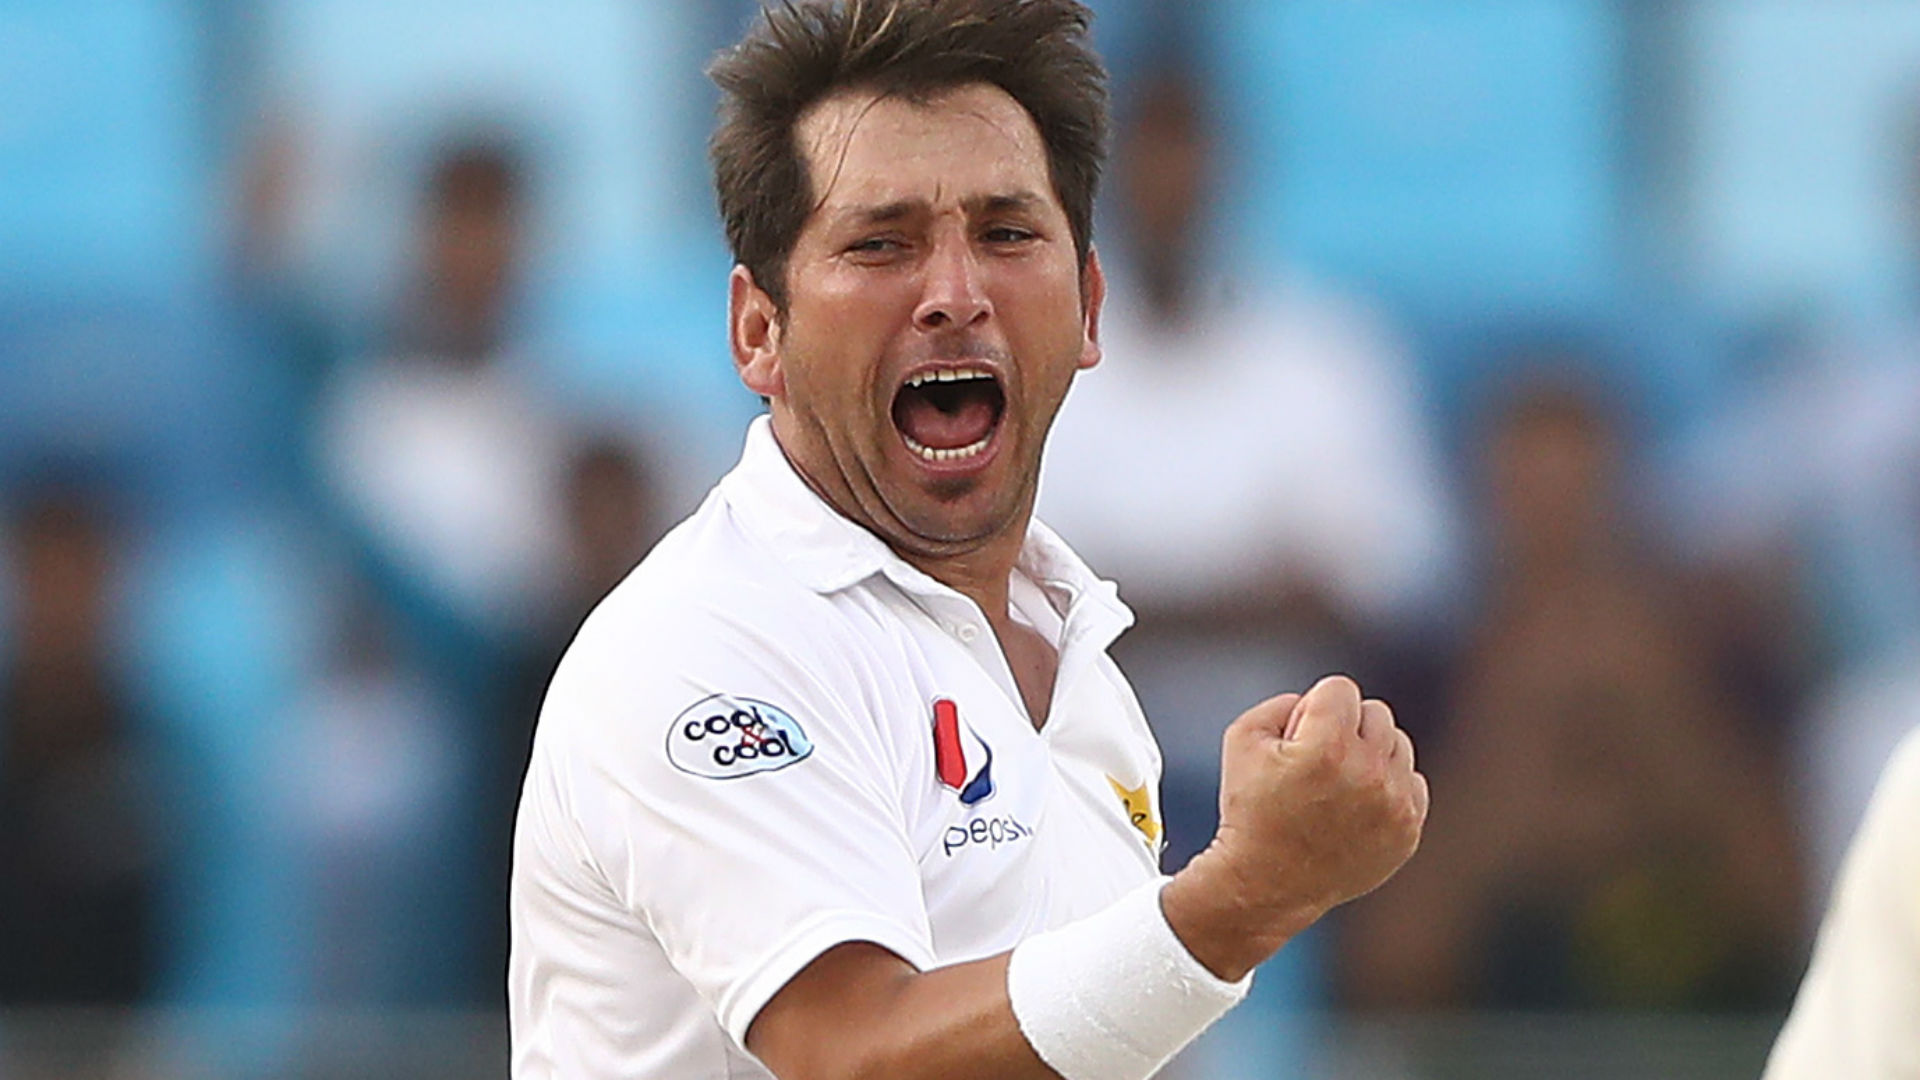 Five wickets each for Yasir Shah and Hasan Ali put Pakistan in a promising position against New Zealand.